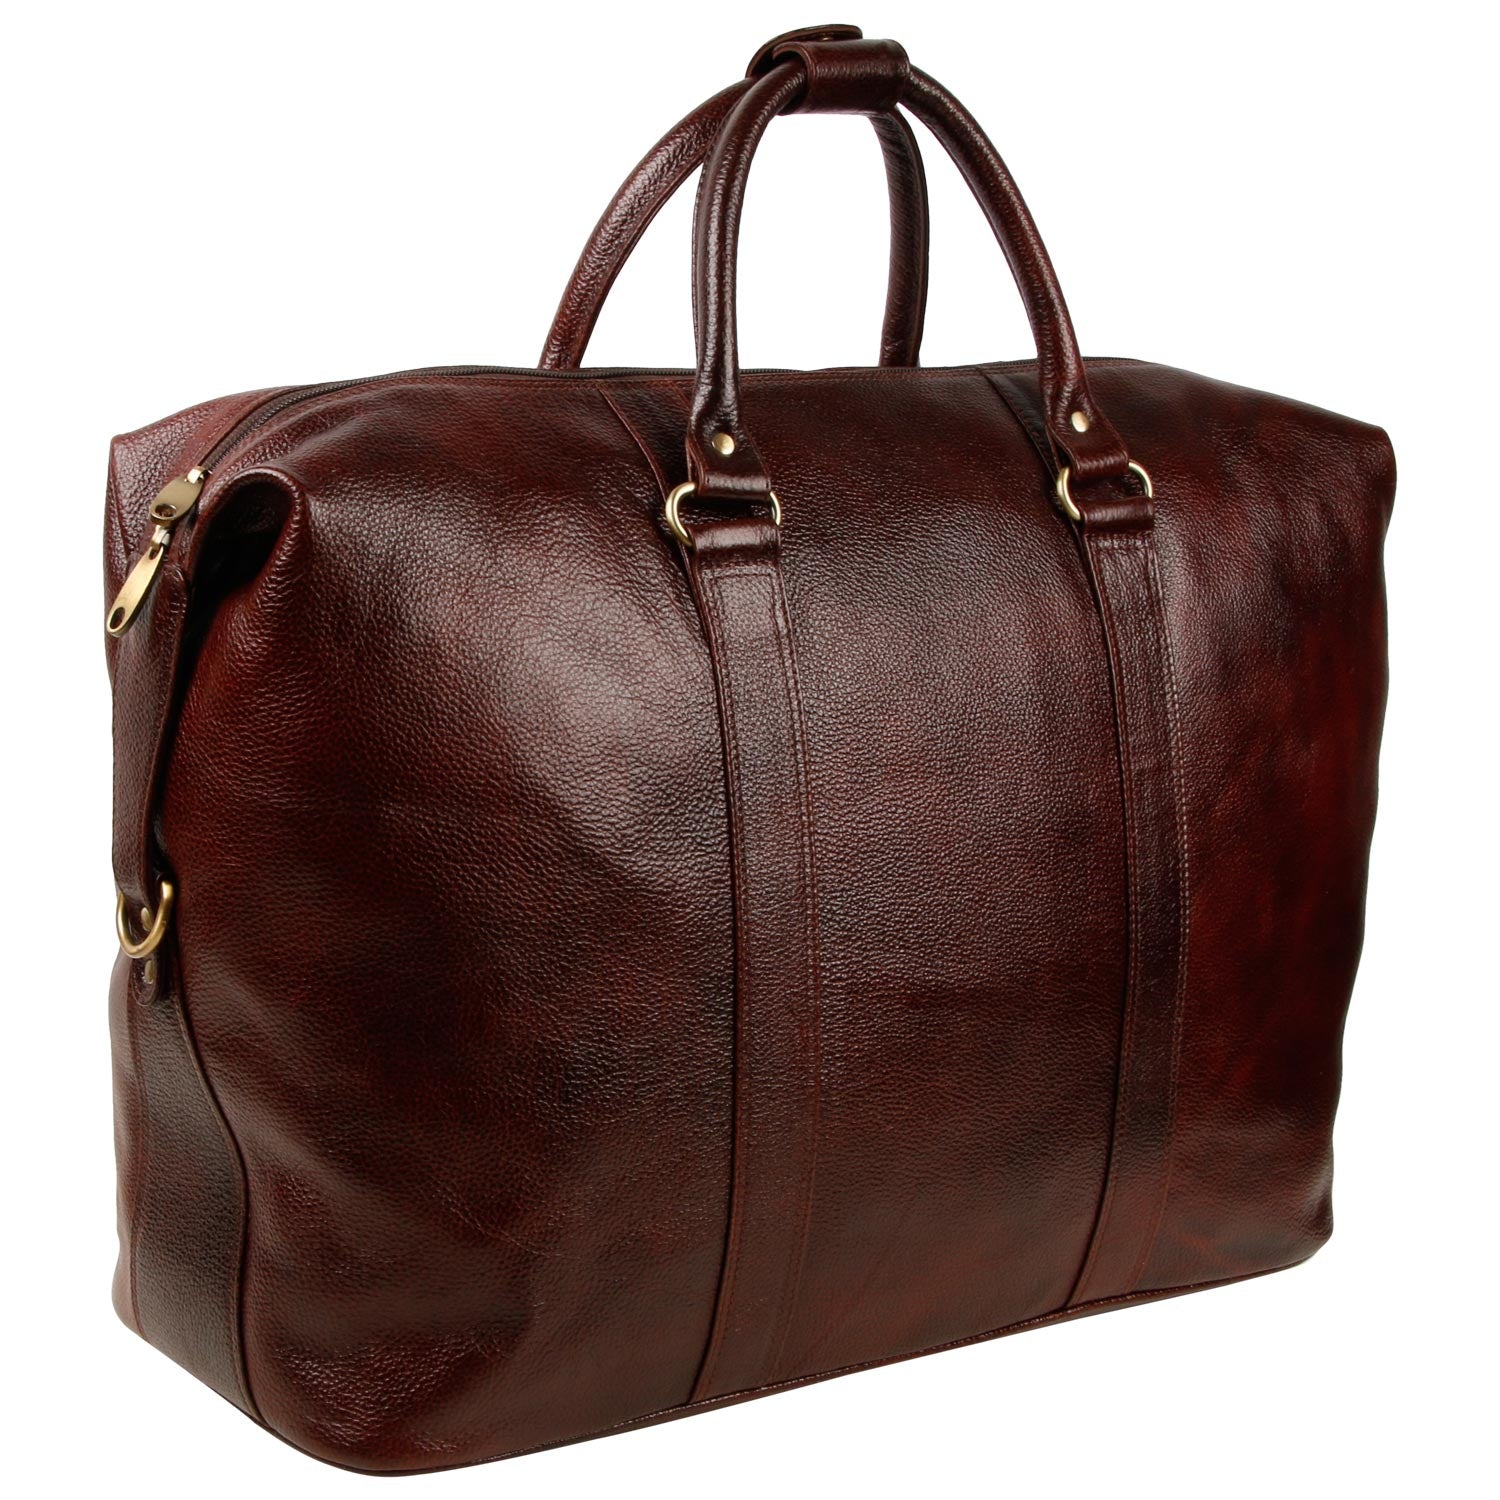 Side image of brown color CARRY ON TOTE SAA MEDIUM SIZE